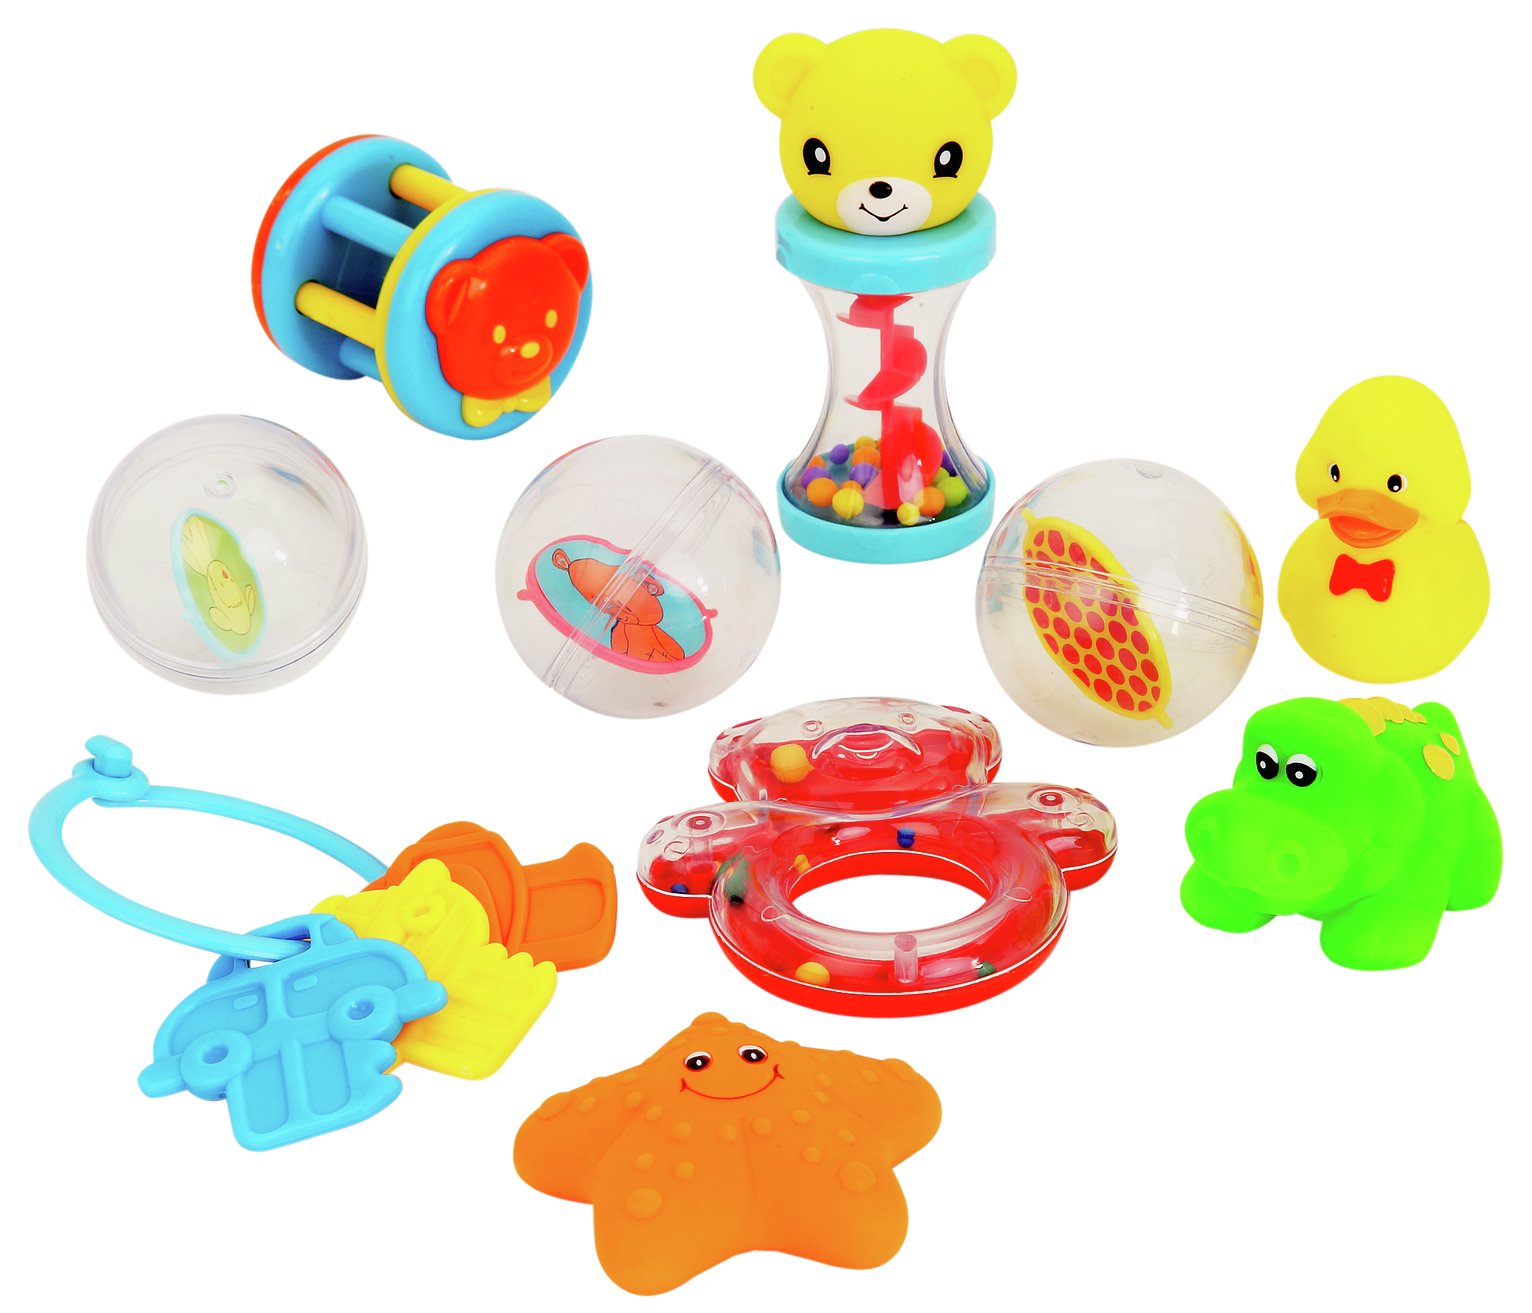 Buy Chad Valley Baby 10 Piece Gift Set 